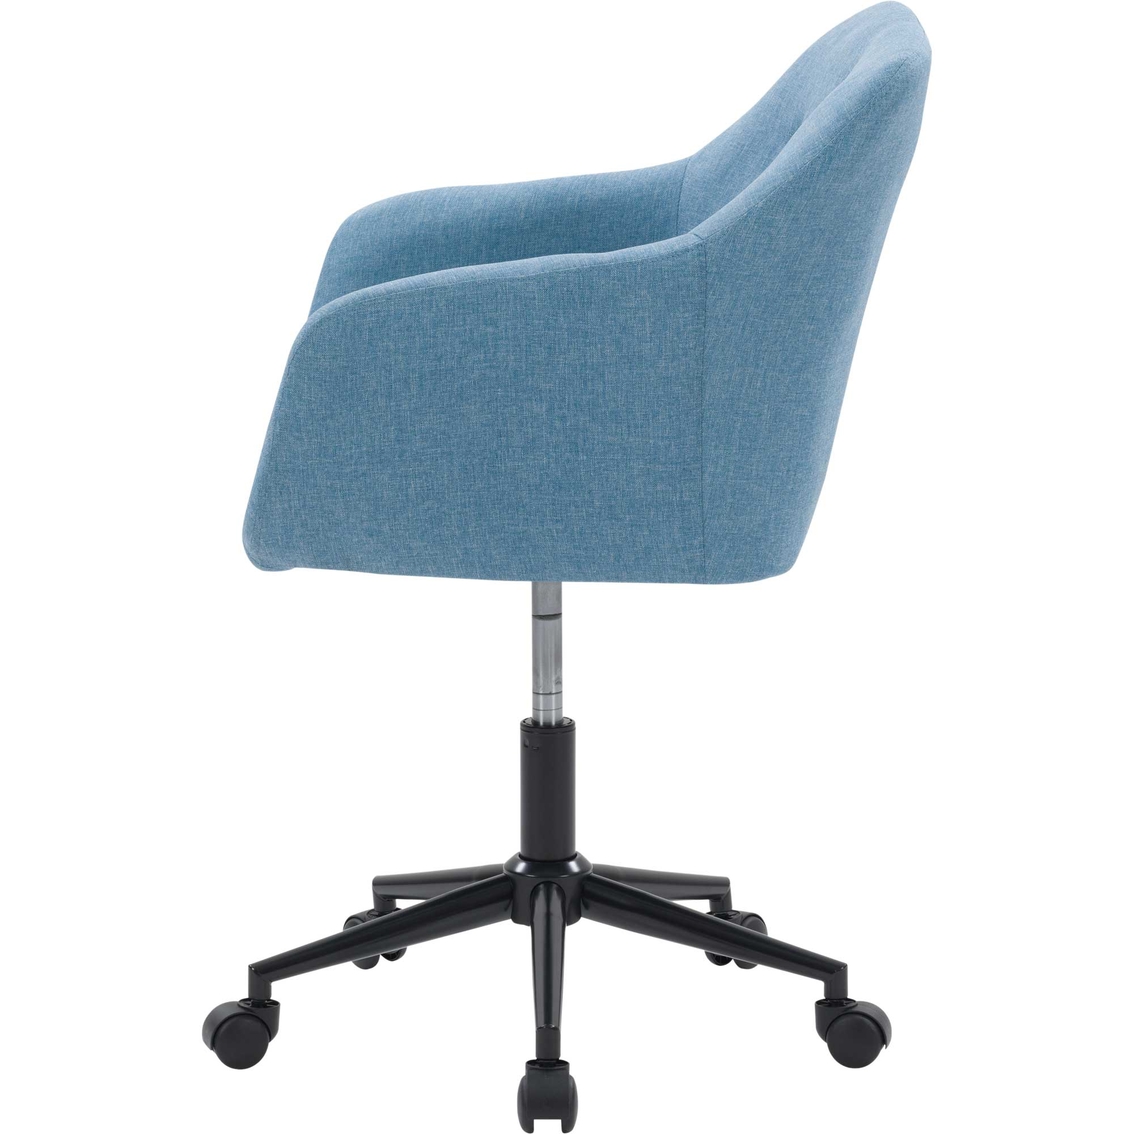 CorLiving Marlowe Upholstered Button Tufted Task Chair - Image 6 of 9